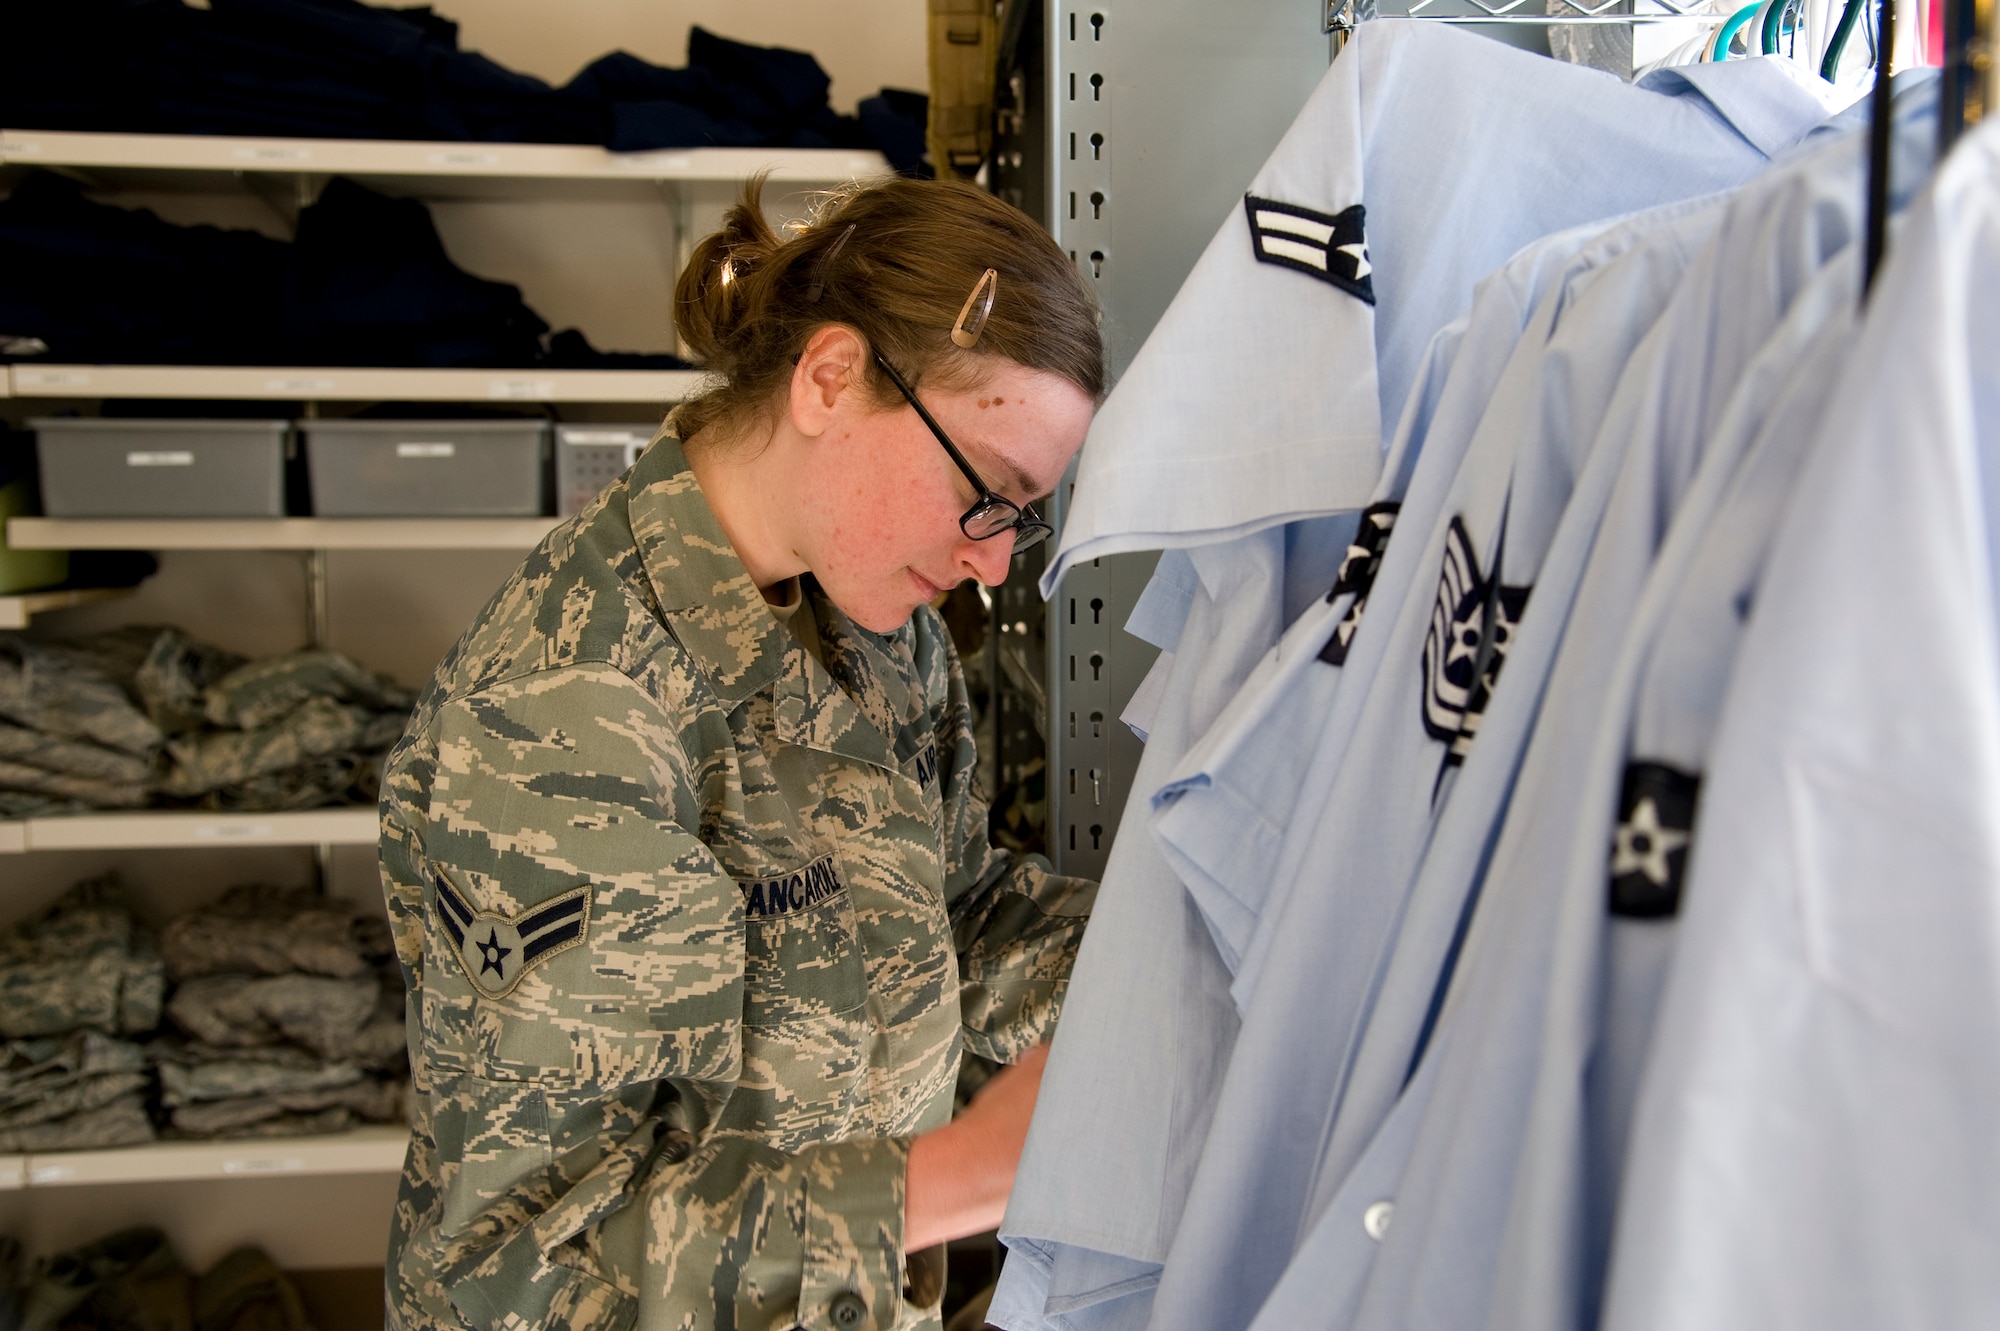 U.S. Air Force Airman 1st Class Danielle Jancarole, an intelligence analyst of 11th Intelligence Squadron, organizes blues uniform blouses at the Airman’s Attic on Hurlburt Field, Fla., Nov. 7, 2012. Active-duty Airmen volunteers coordinate with their units to lend a hand at the Airman’s Attic. (U.S. Air Force photo/ Airman 1st Class Michelle Vickers)
